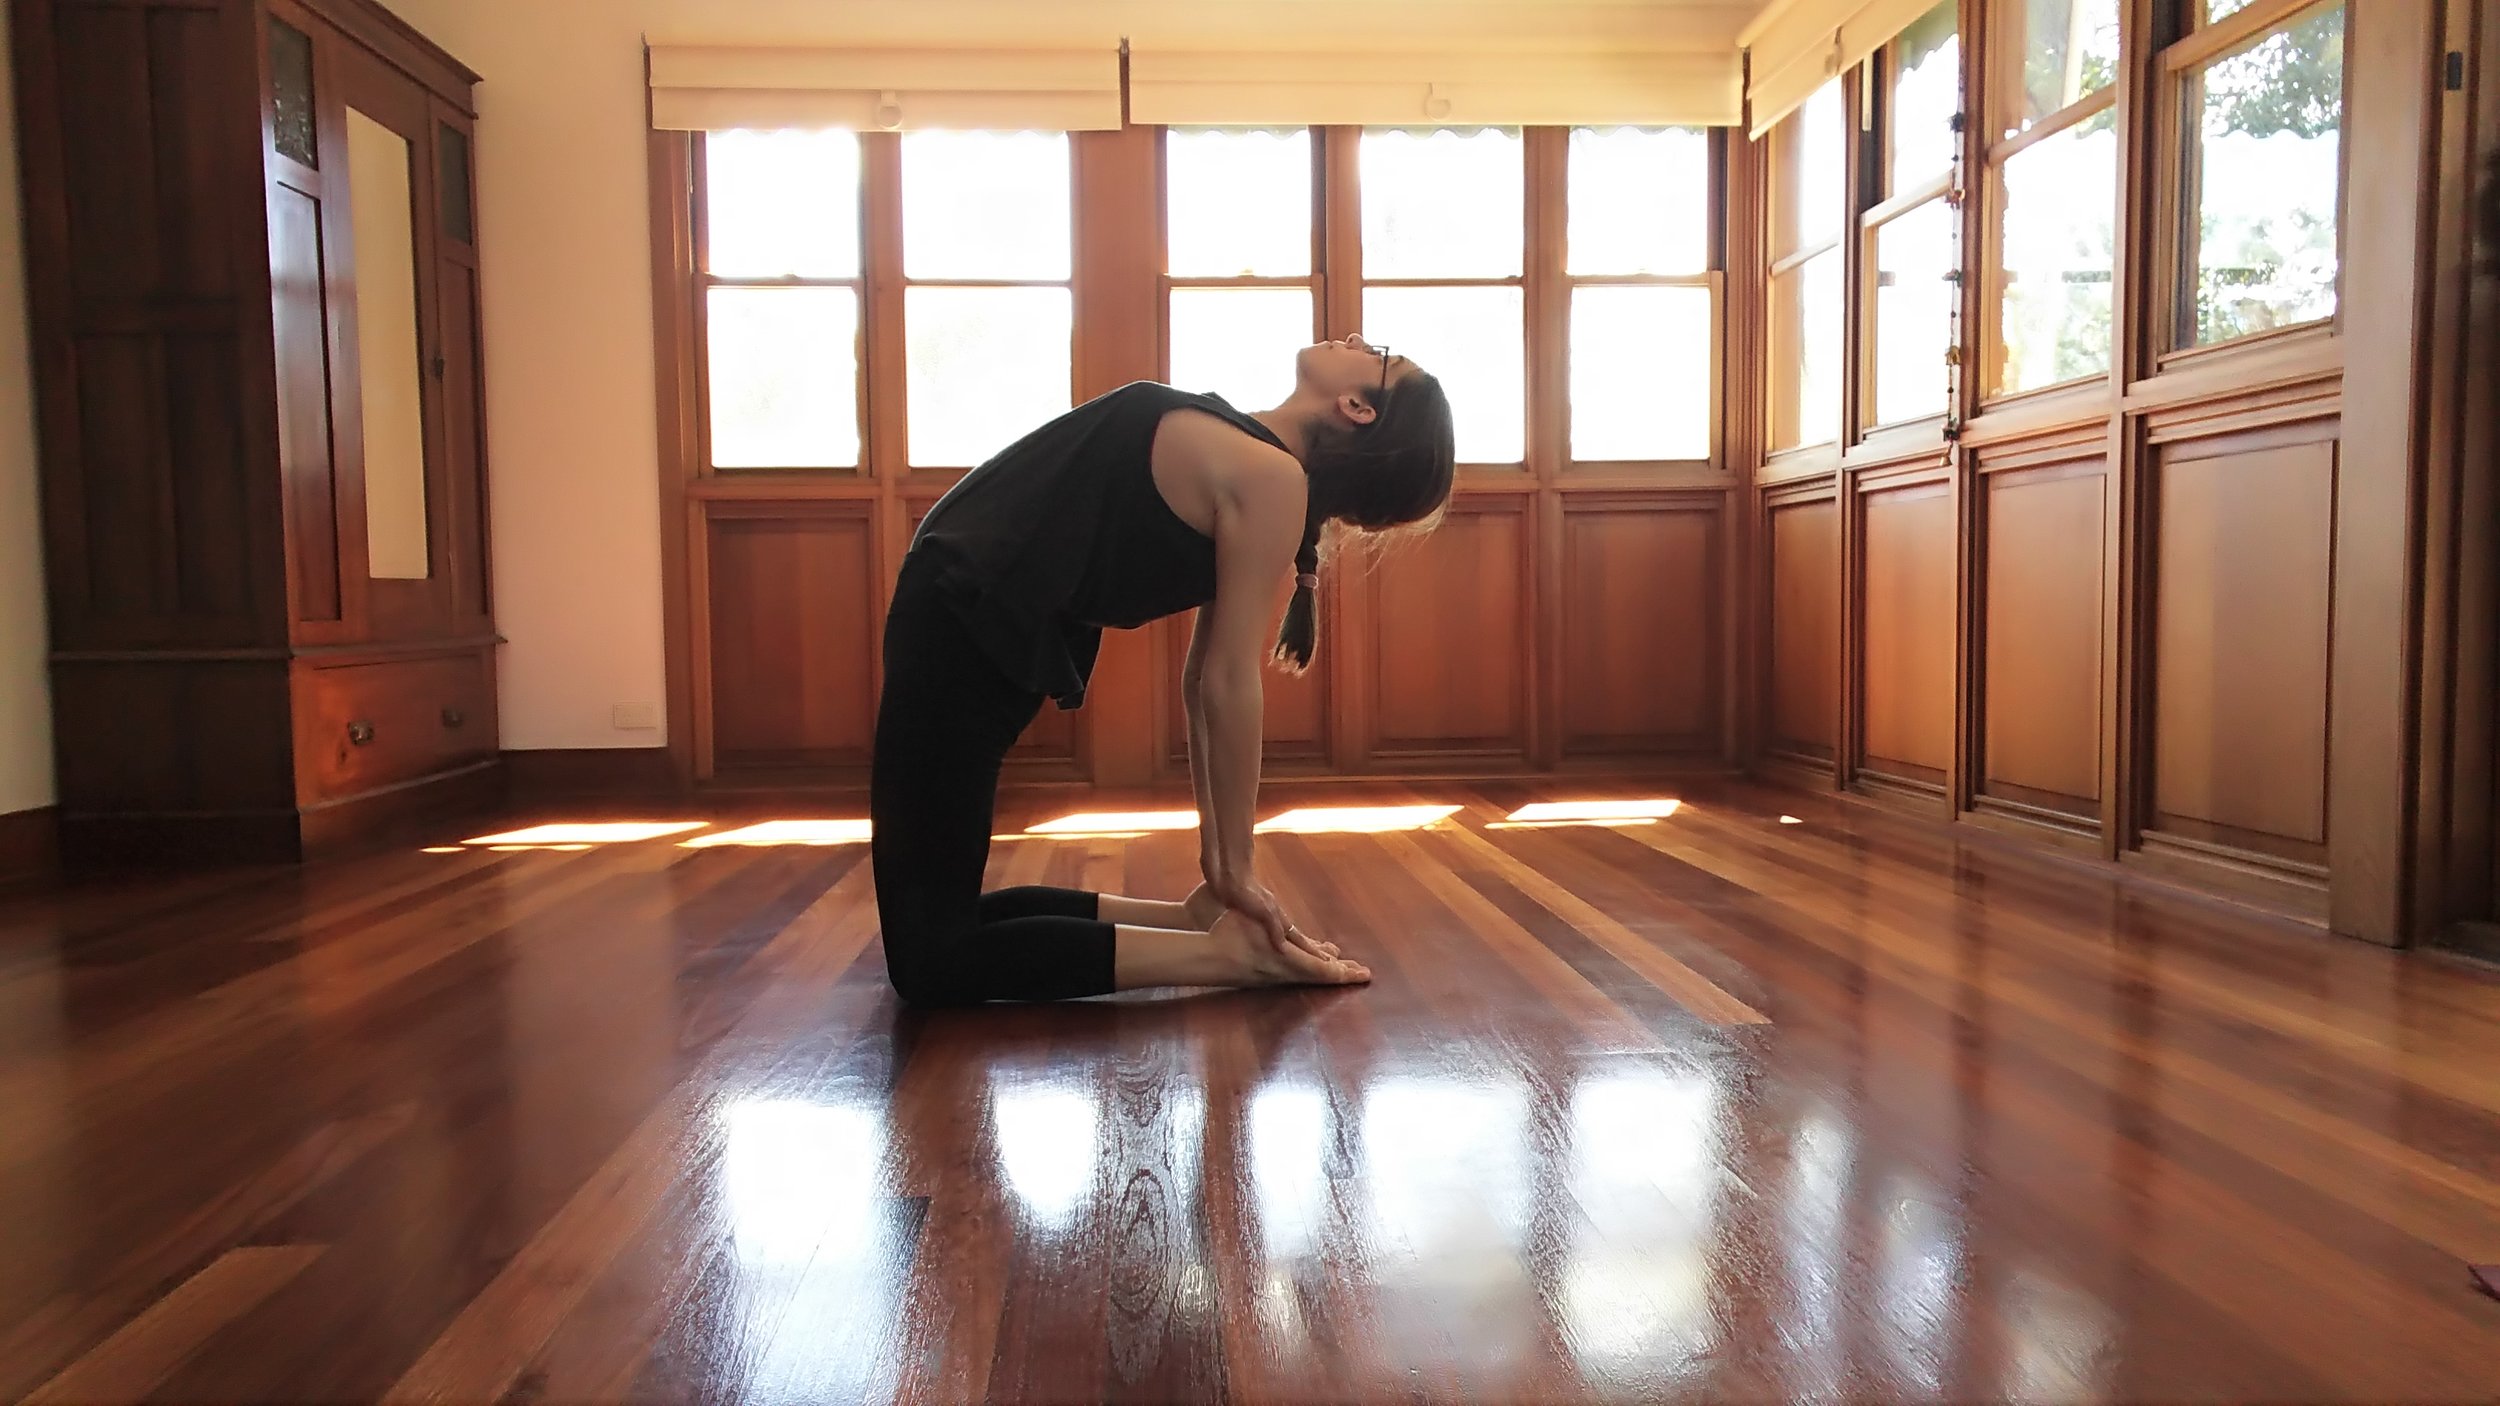  Following from last pose, if it feels safe for your body, continue broadening chest and release the hands towards the feet. If you feel pain in your lower back you have gone too far - remain with the previous pose as your full expression. 